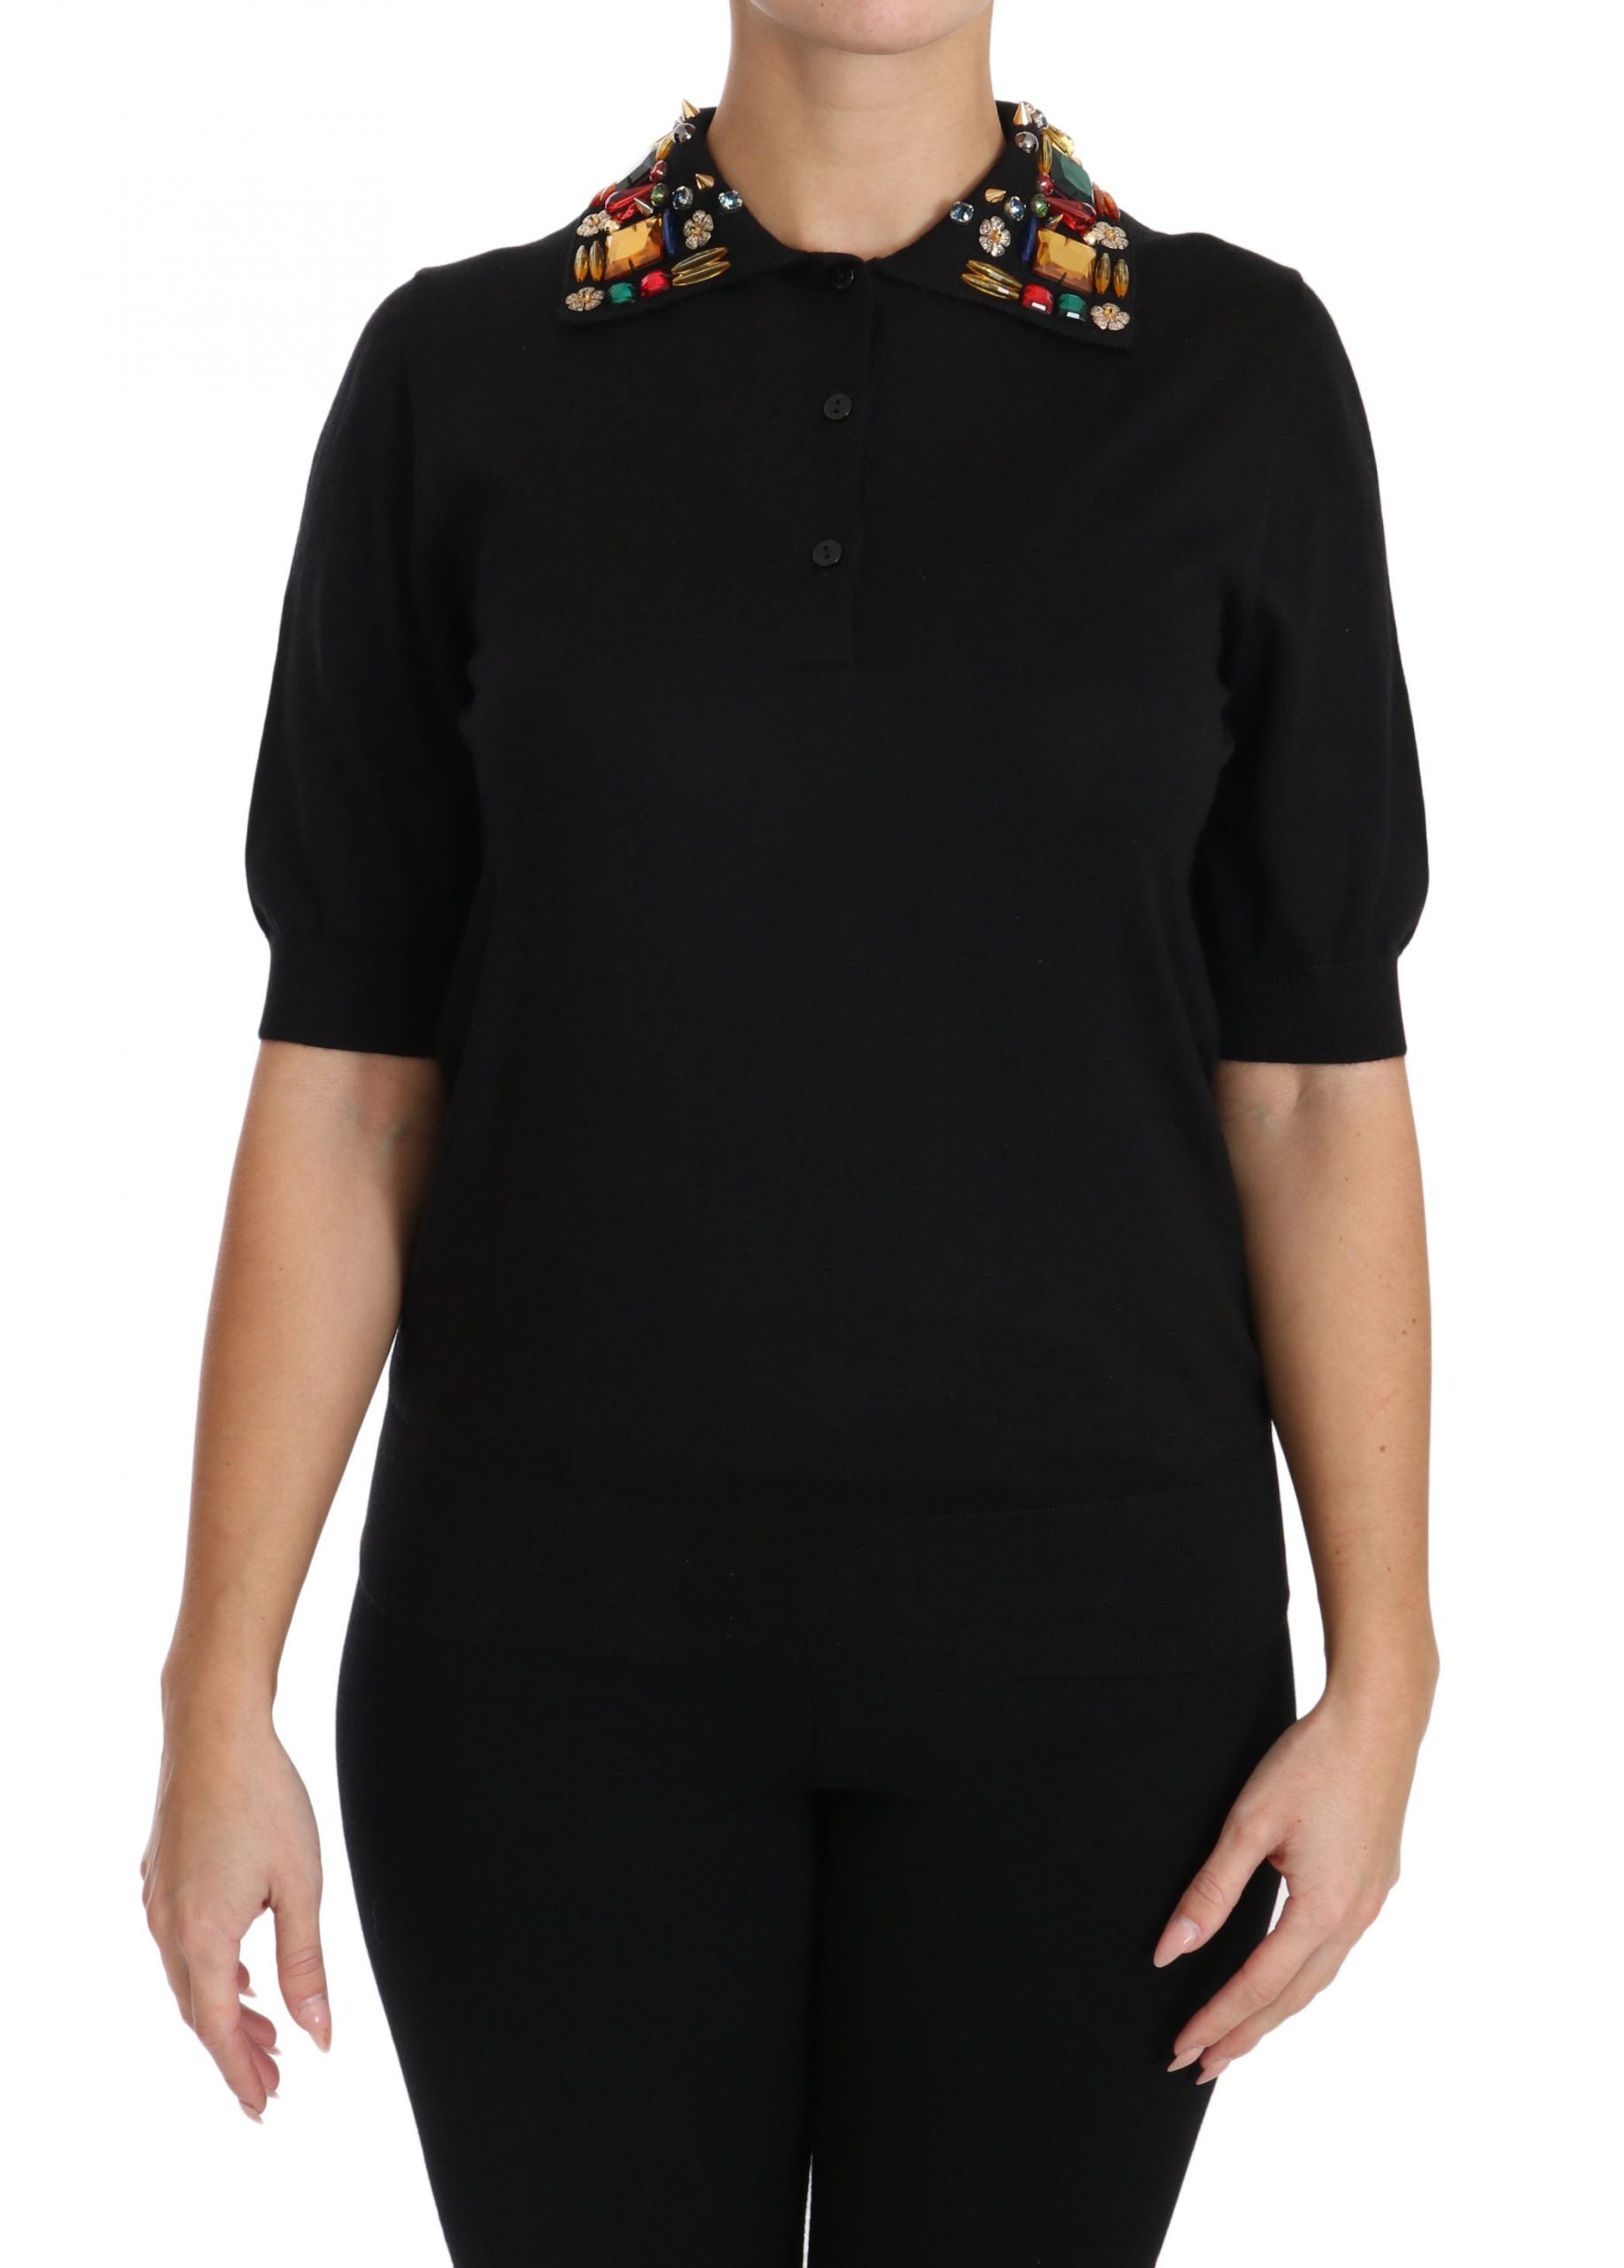 Buy Black Cashmere Crystal Collar Top T-Shirt by Dolce & Gabbana